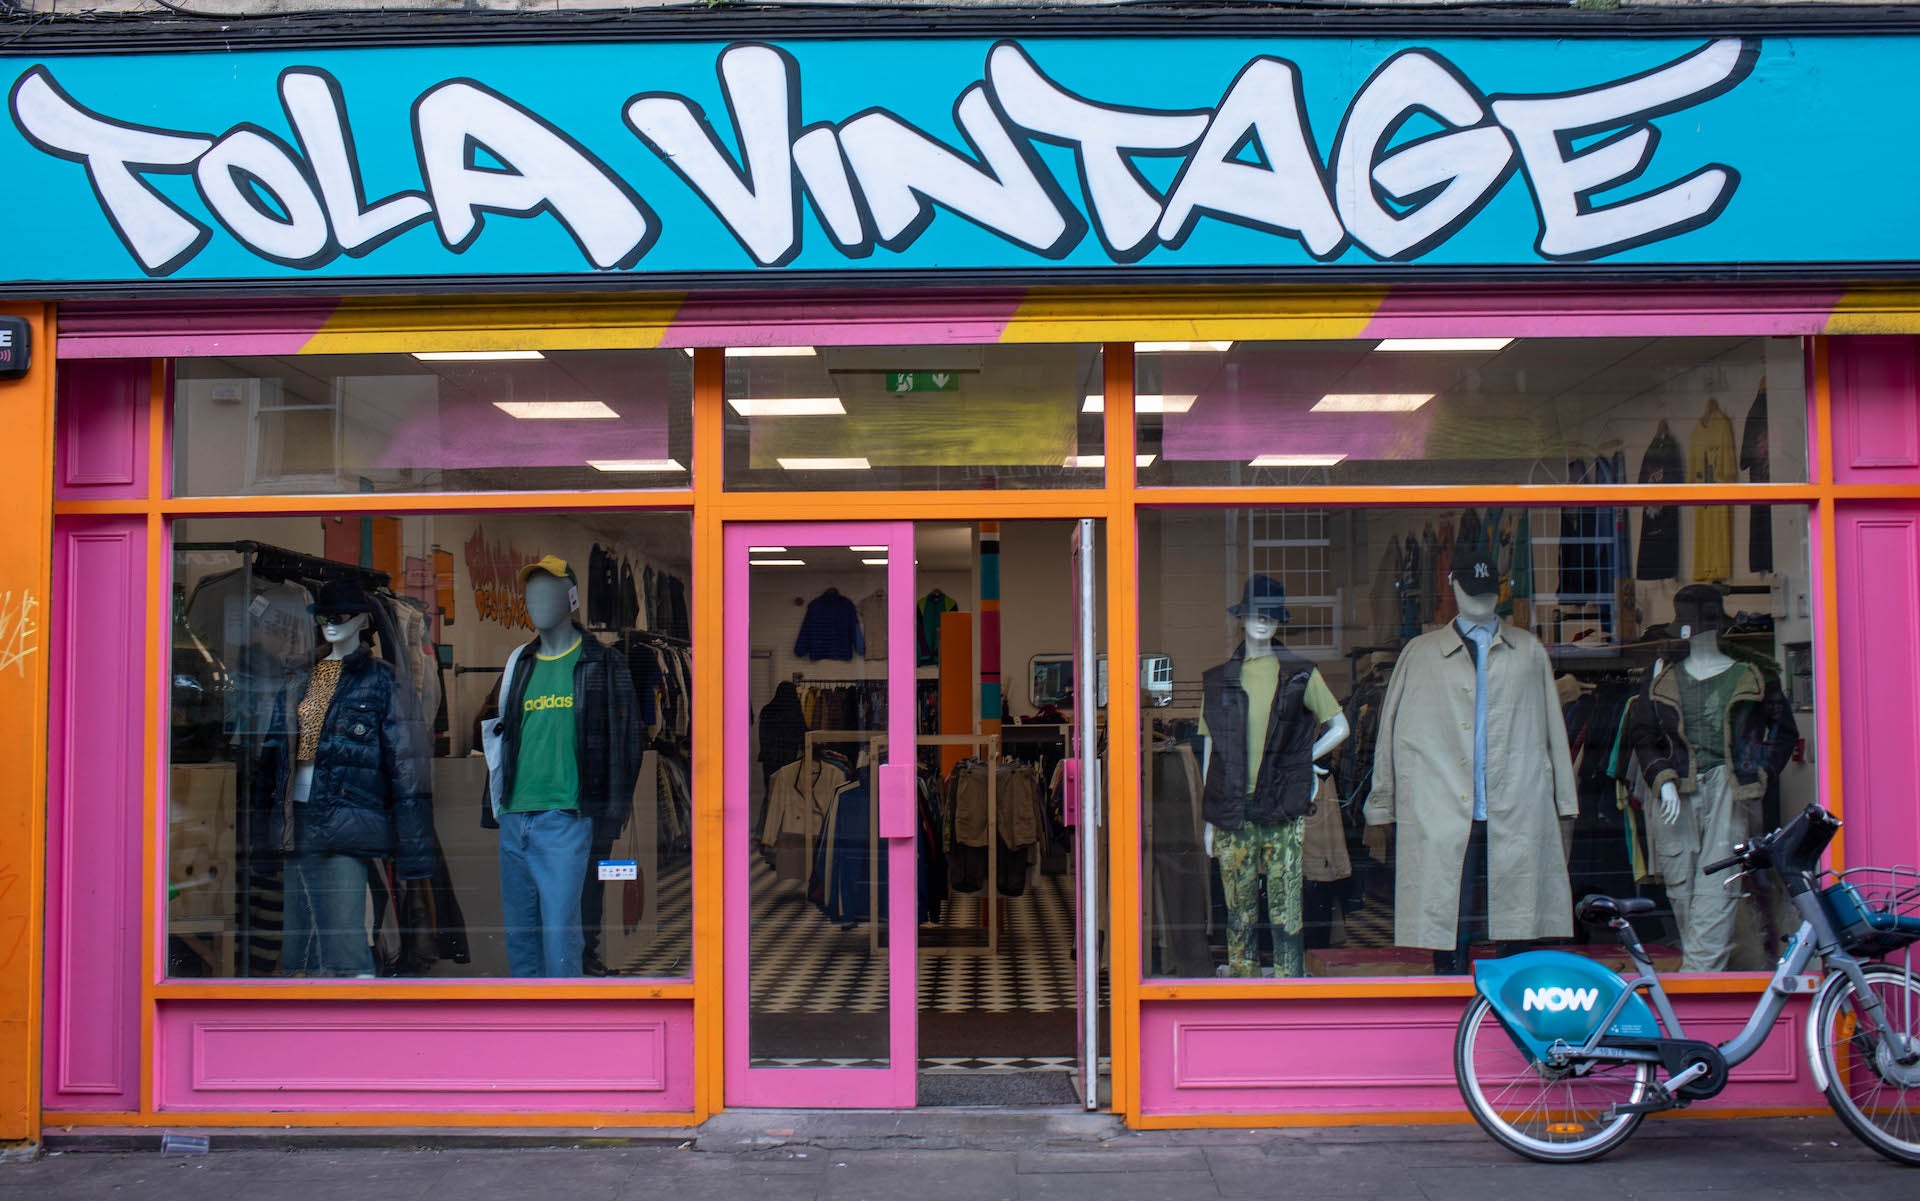 Colourful store front of Tola Vintage in Dublin. The store is painted in pink, orange and blue with the name painted in bold font.